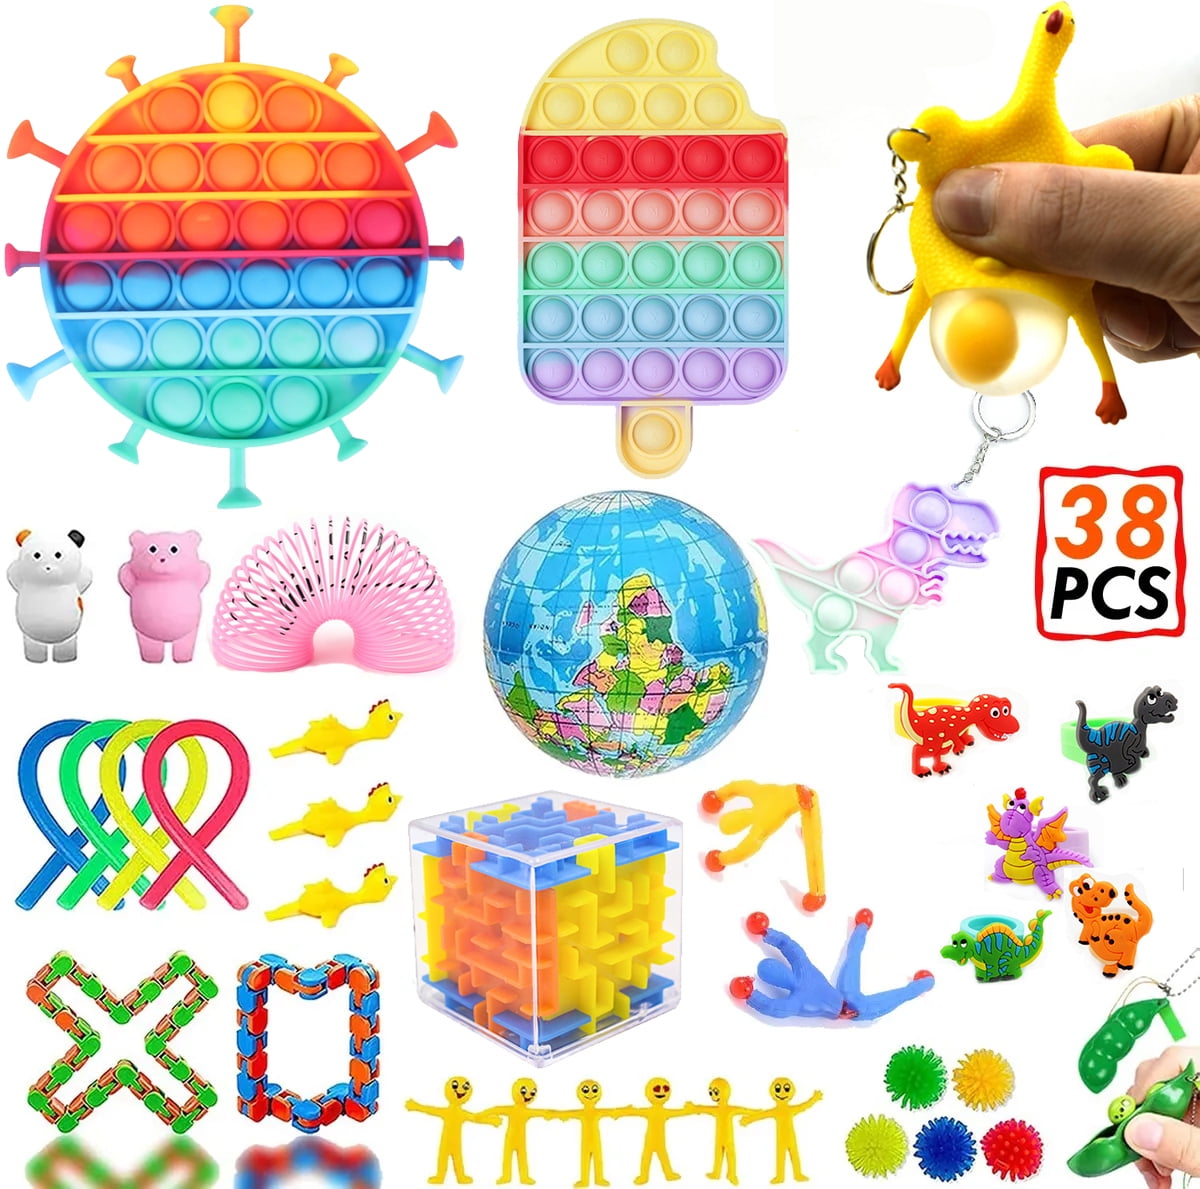 Stress Relief Novelty Fidget Pack for Kids Adults Relaxing Therapy Fidget Box with Simple Dimple and Pop on It Toy Cheap Sensory Toys Pack for Kids Adults Fidget Toys Set 26pcs Fidget Pack 5